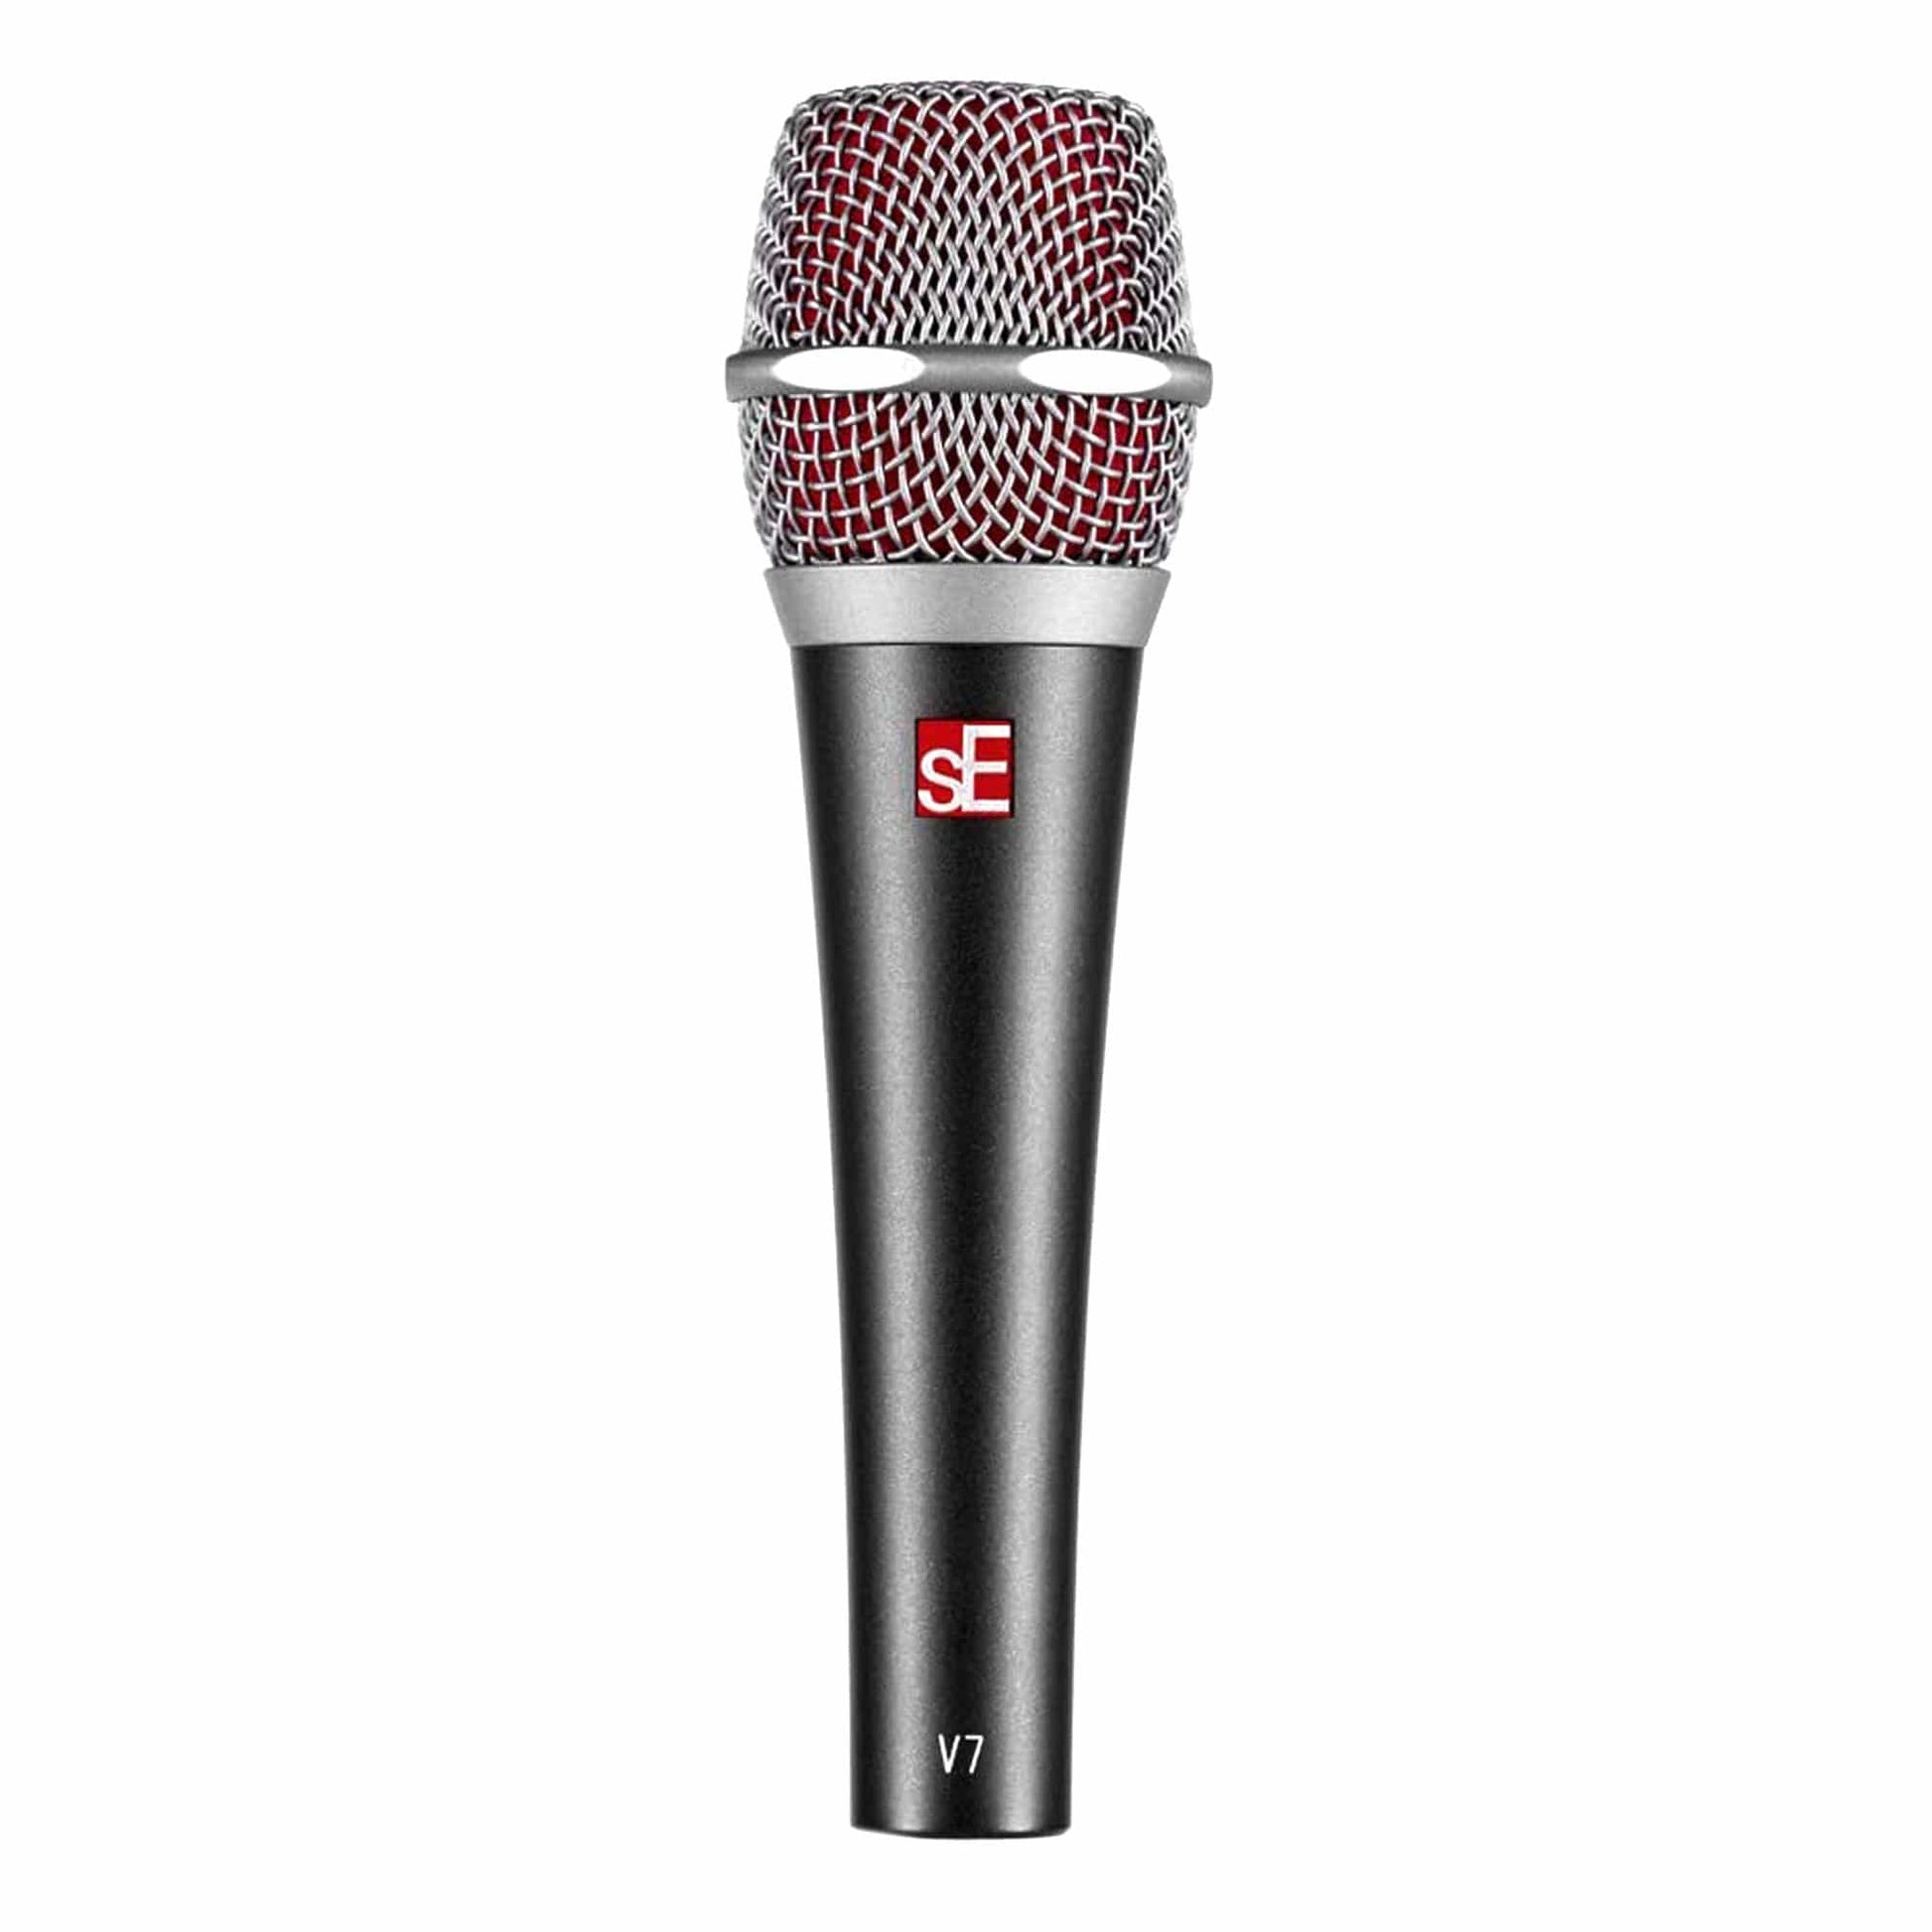 sE Electronics V7 Supercardioid Dynamic Handheld Vocal Microphone Pro Audio / Microphones